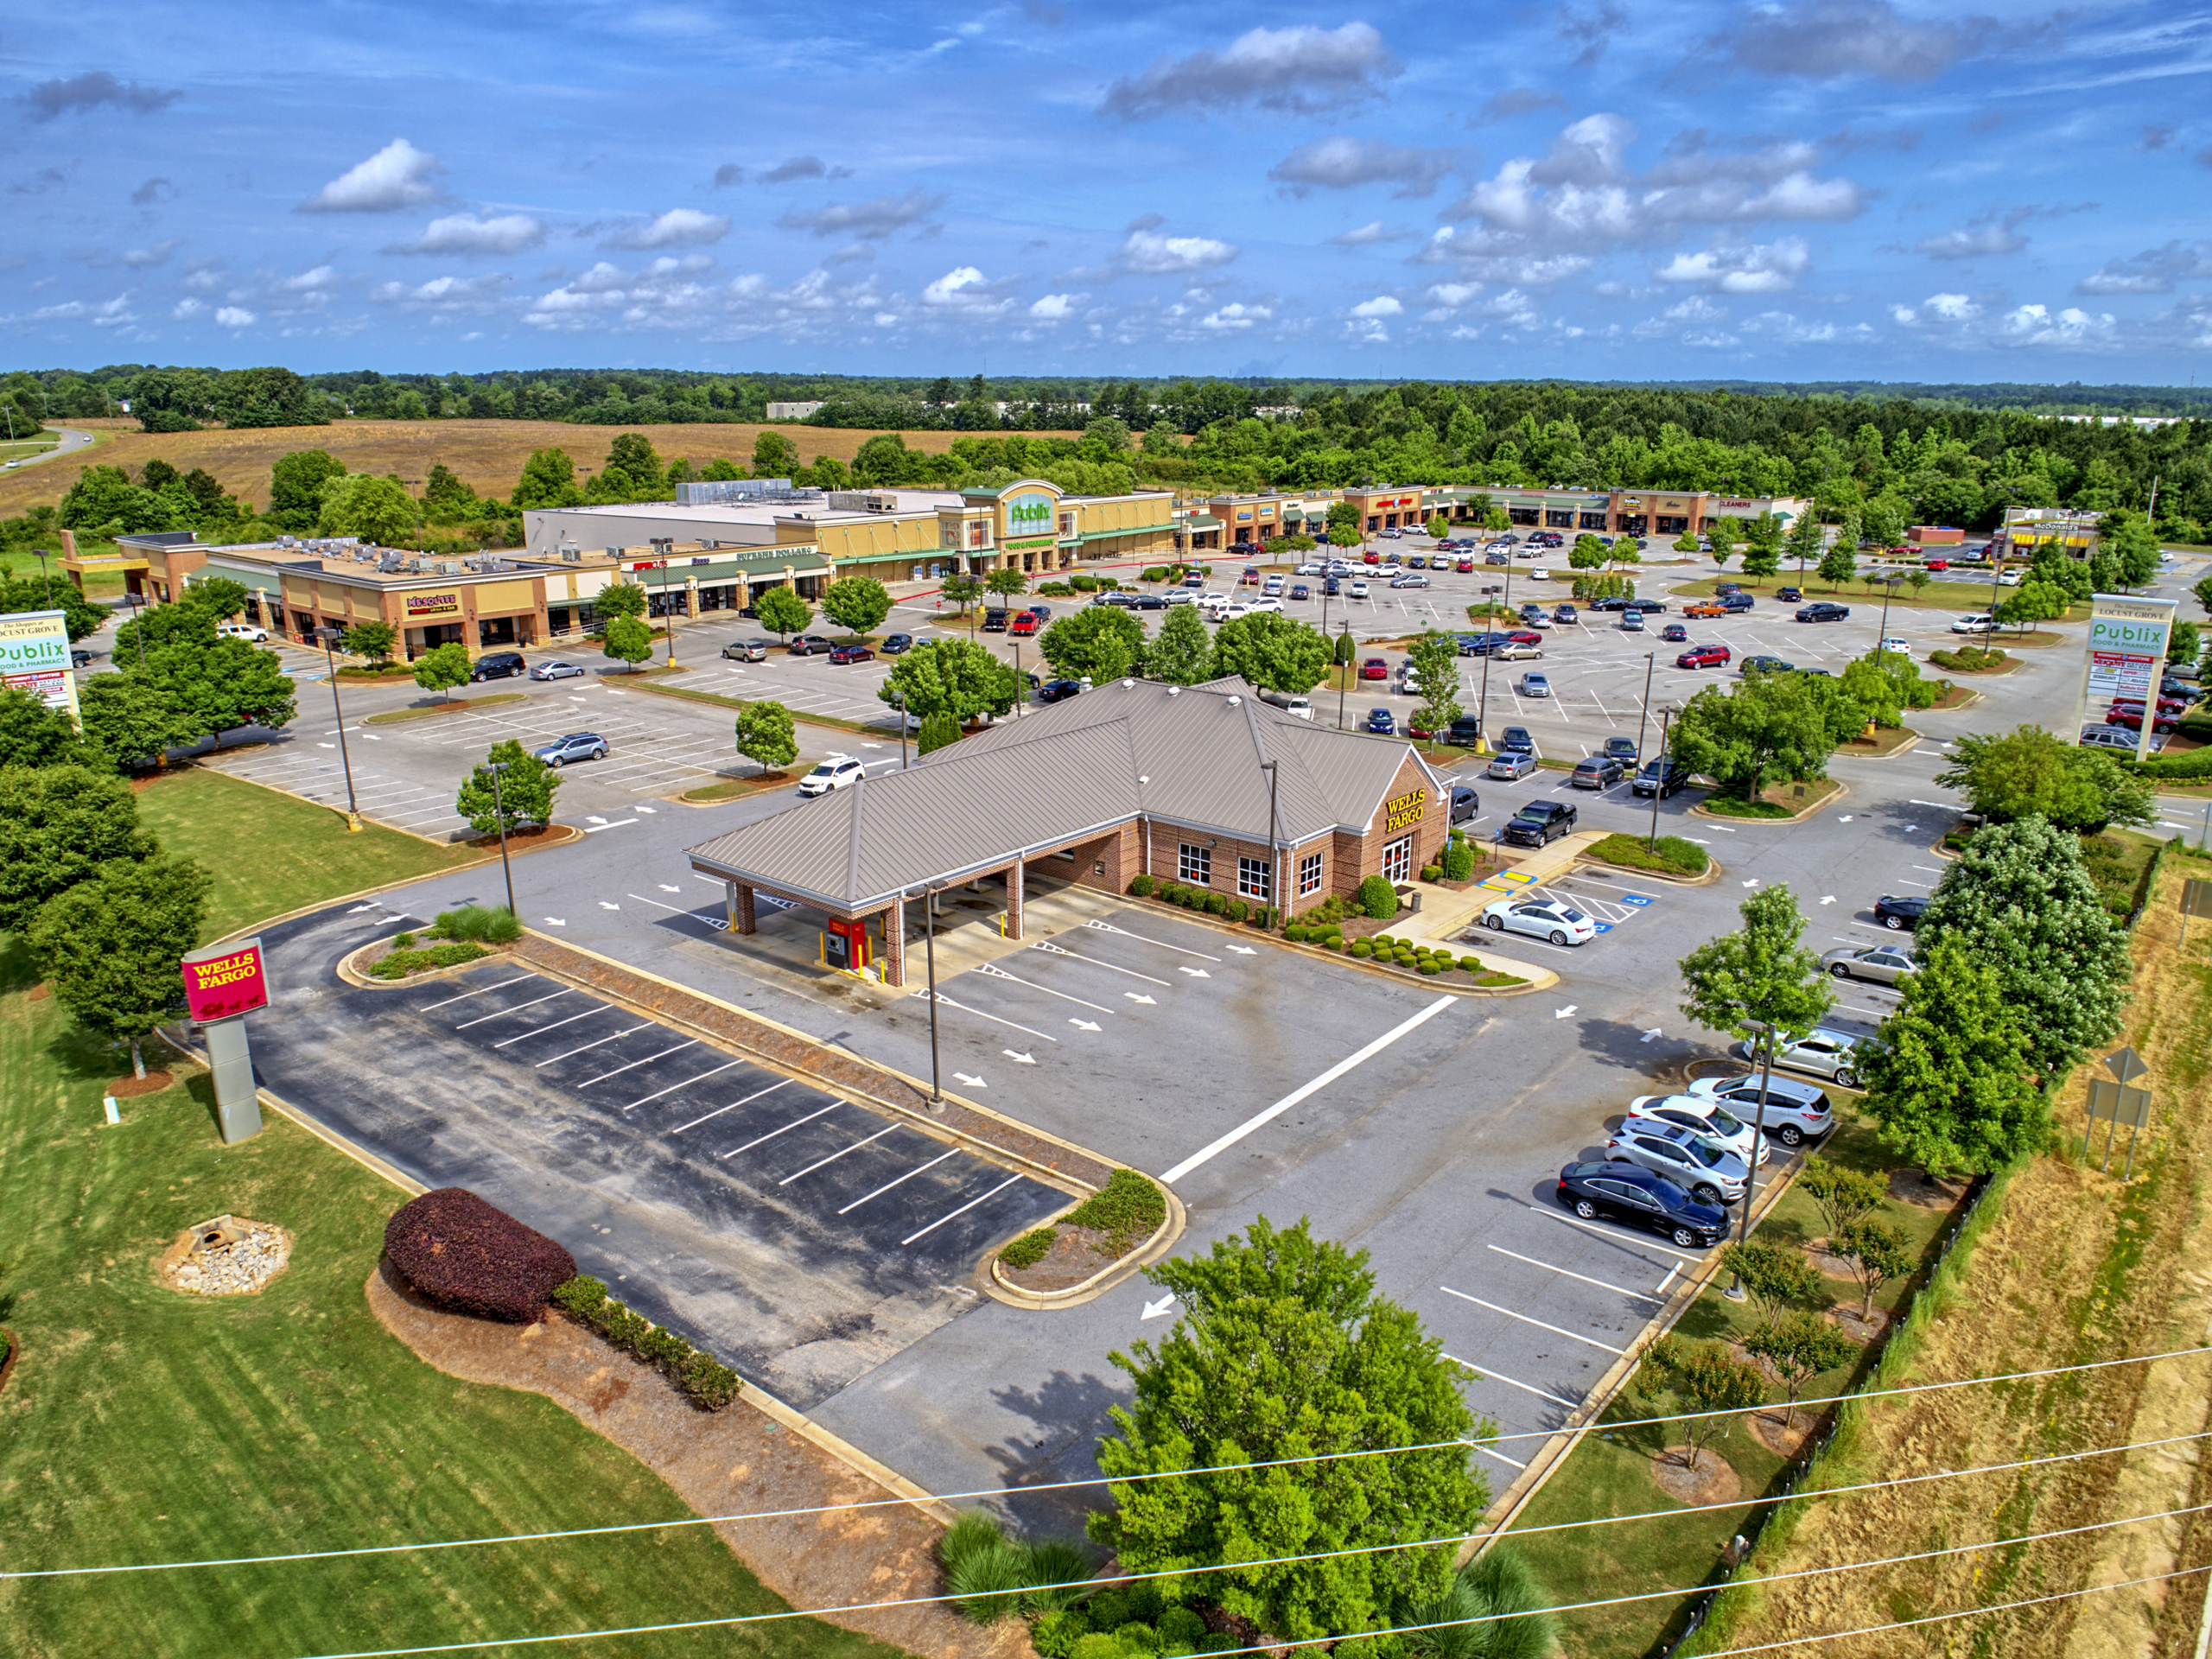 The Shoppes at Locust Grove: 2642 Highway 155, Locust Grove, GA 30248 (CLOSED, Stratus Property Group)